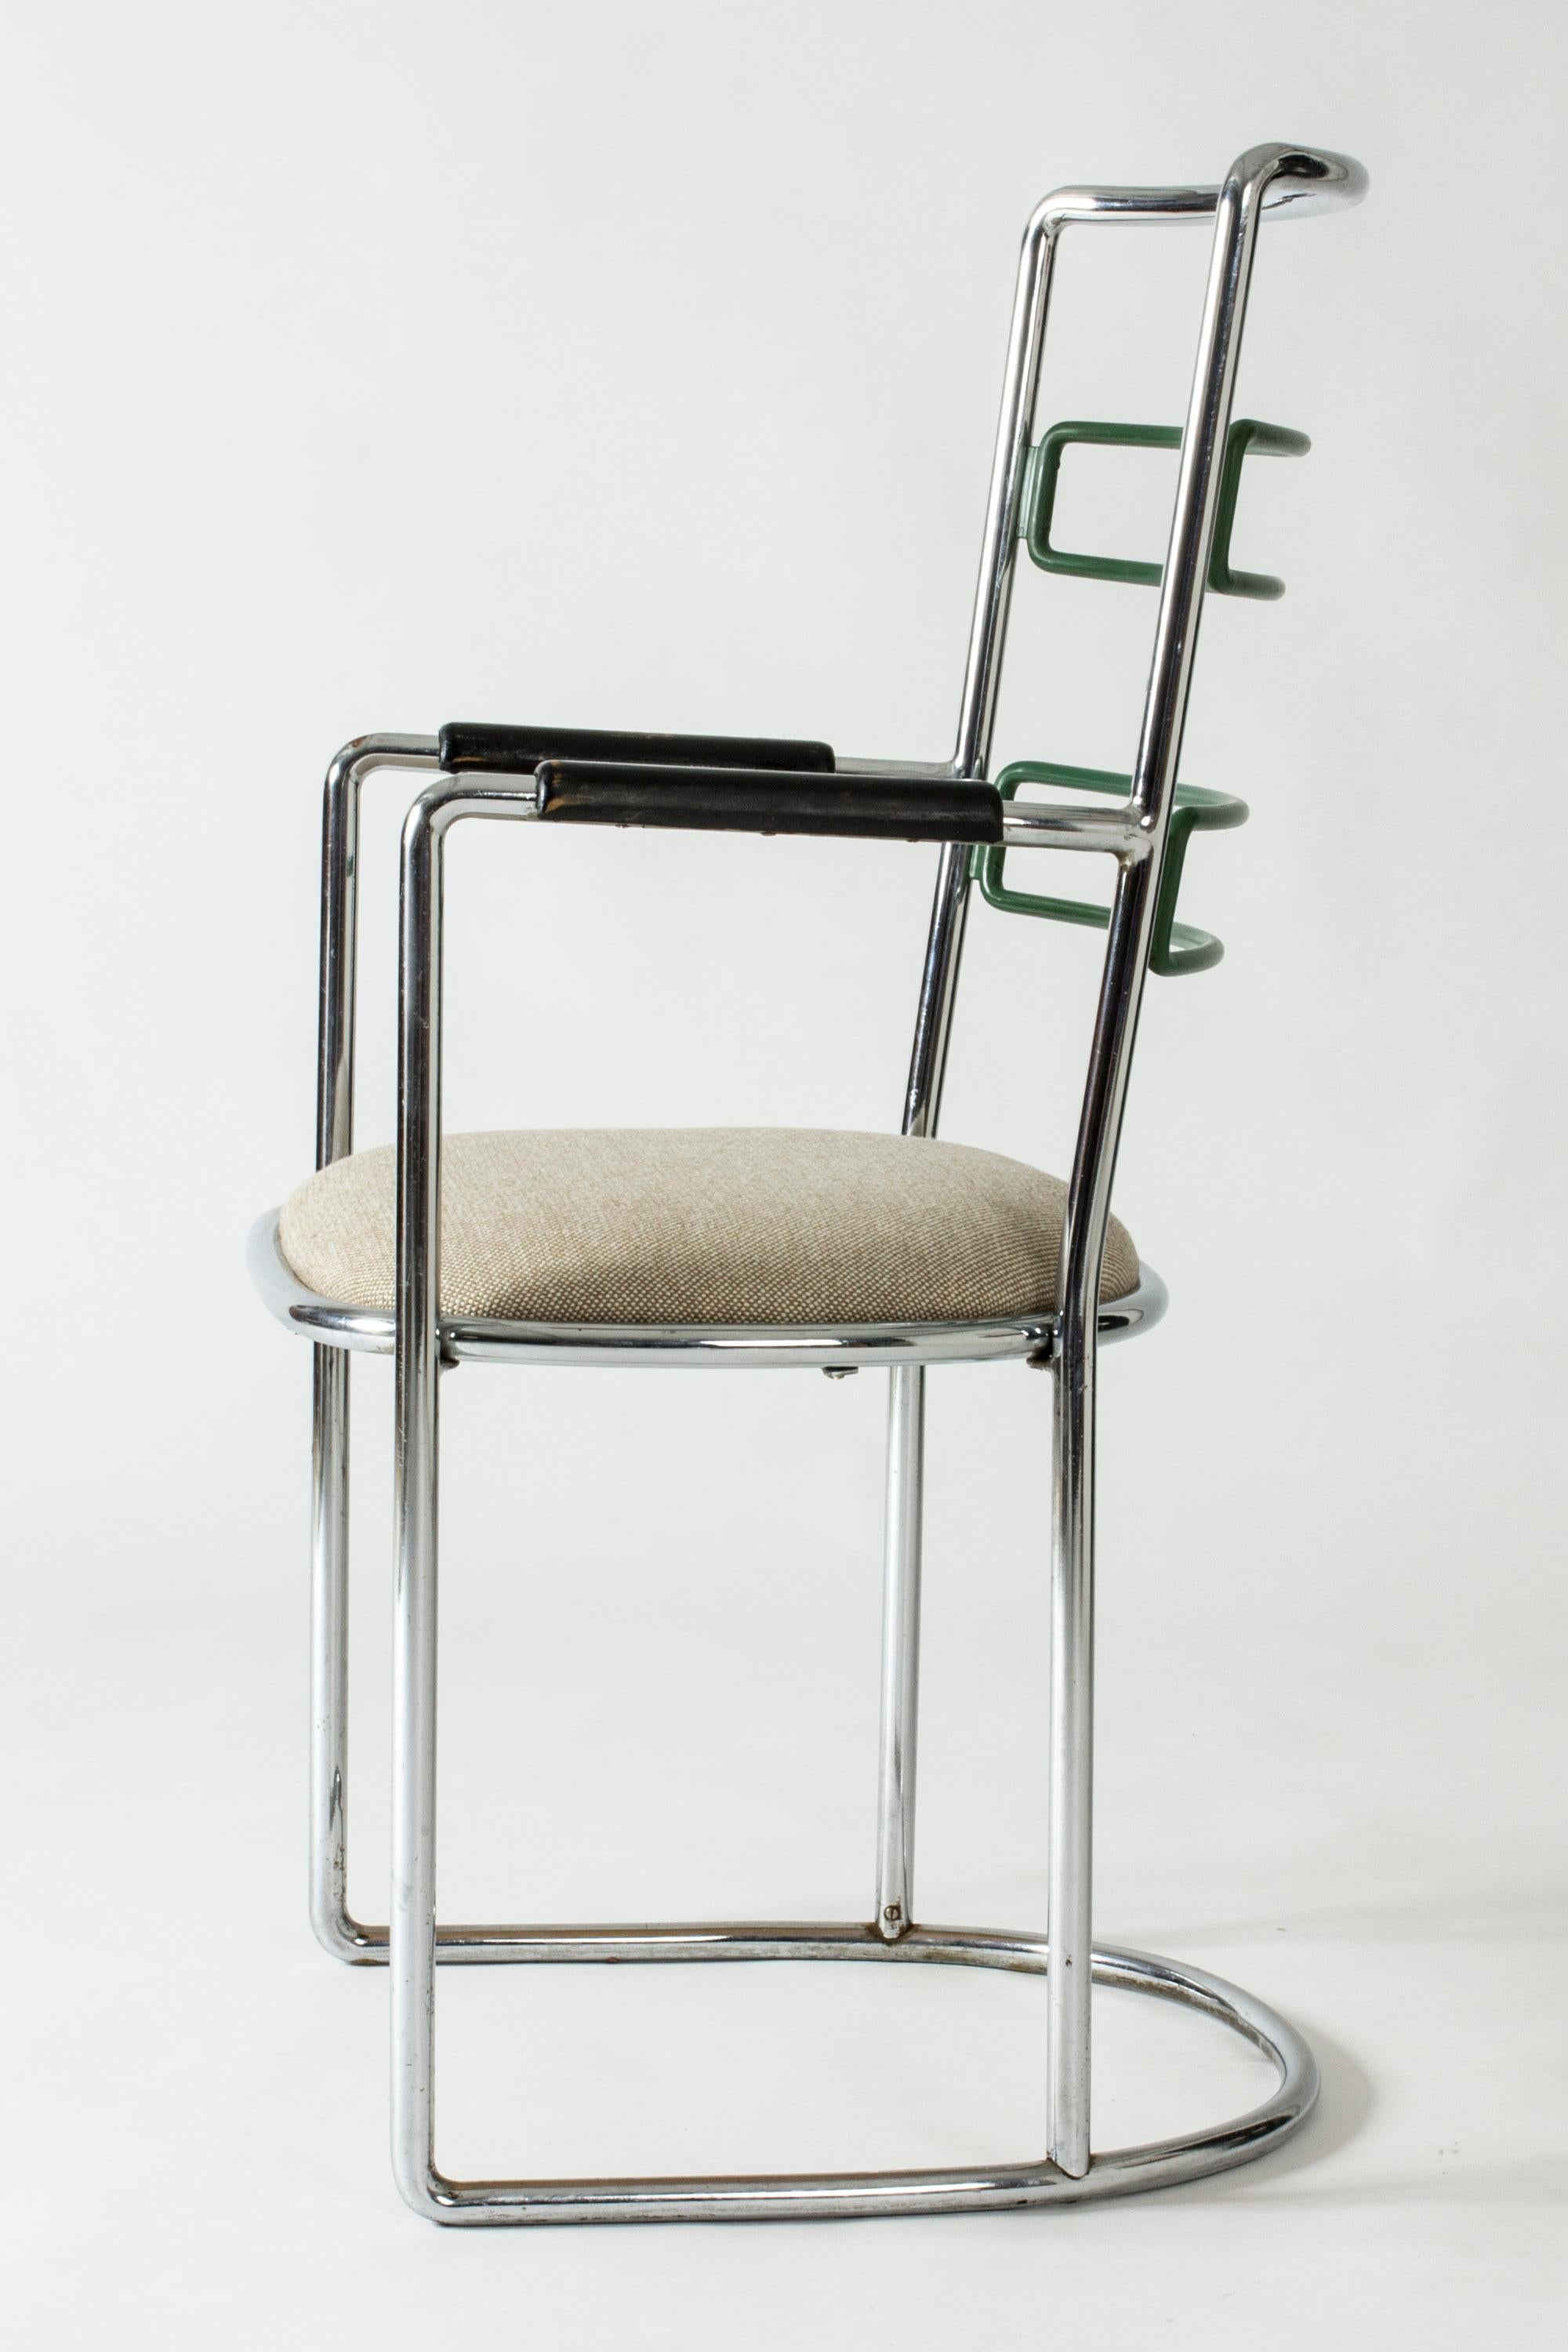 Striking lounge chair by Axel Einar Hjorth, designed in 1930. Strict, sleek form made in steel, with upholstered seat, wooden armrests and green lacquered back detail.

Literature: Christian Björk, Thomas Ekström and Eric Ericson, Axel Einar